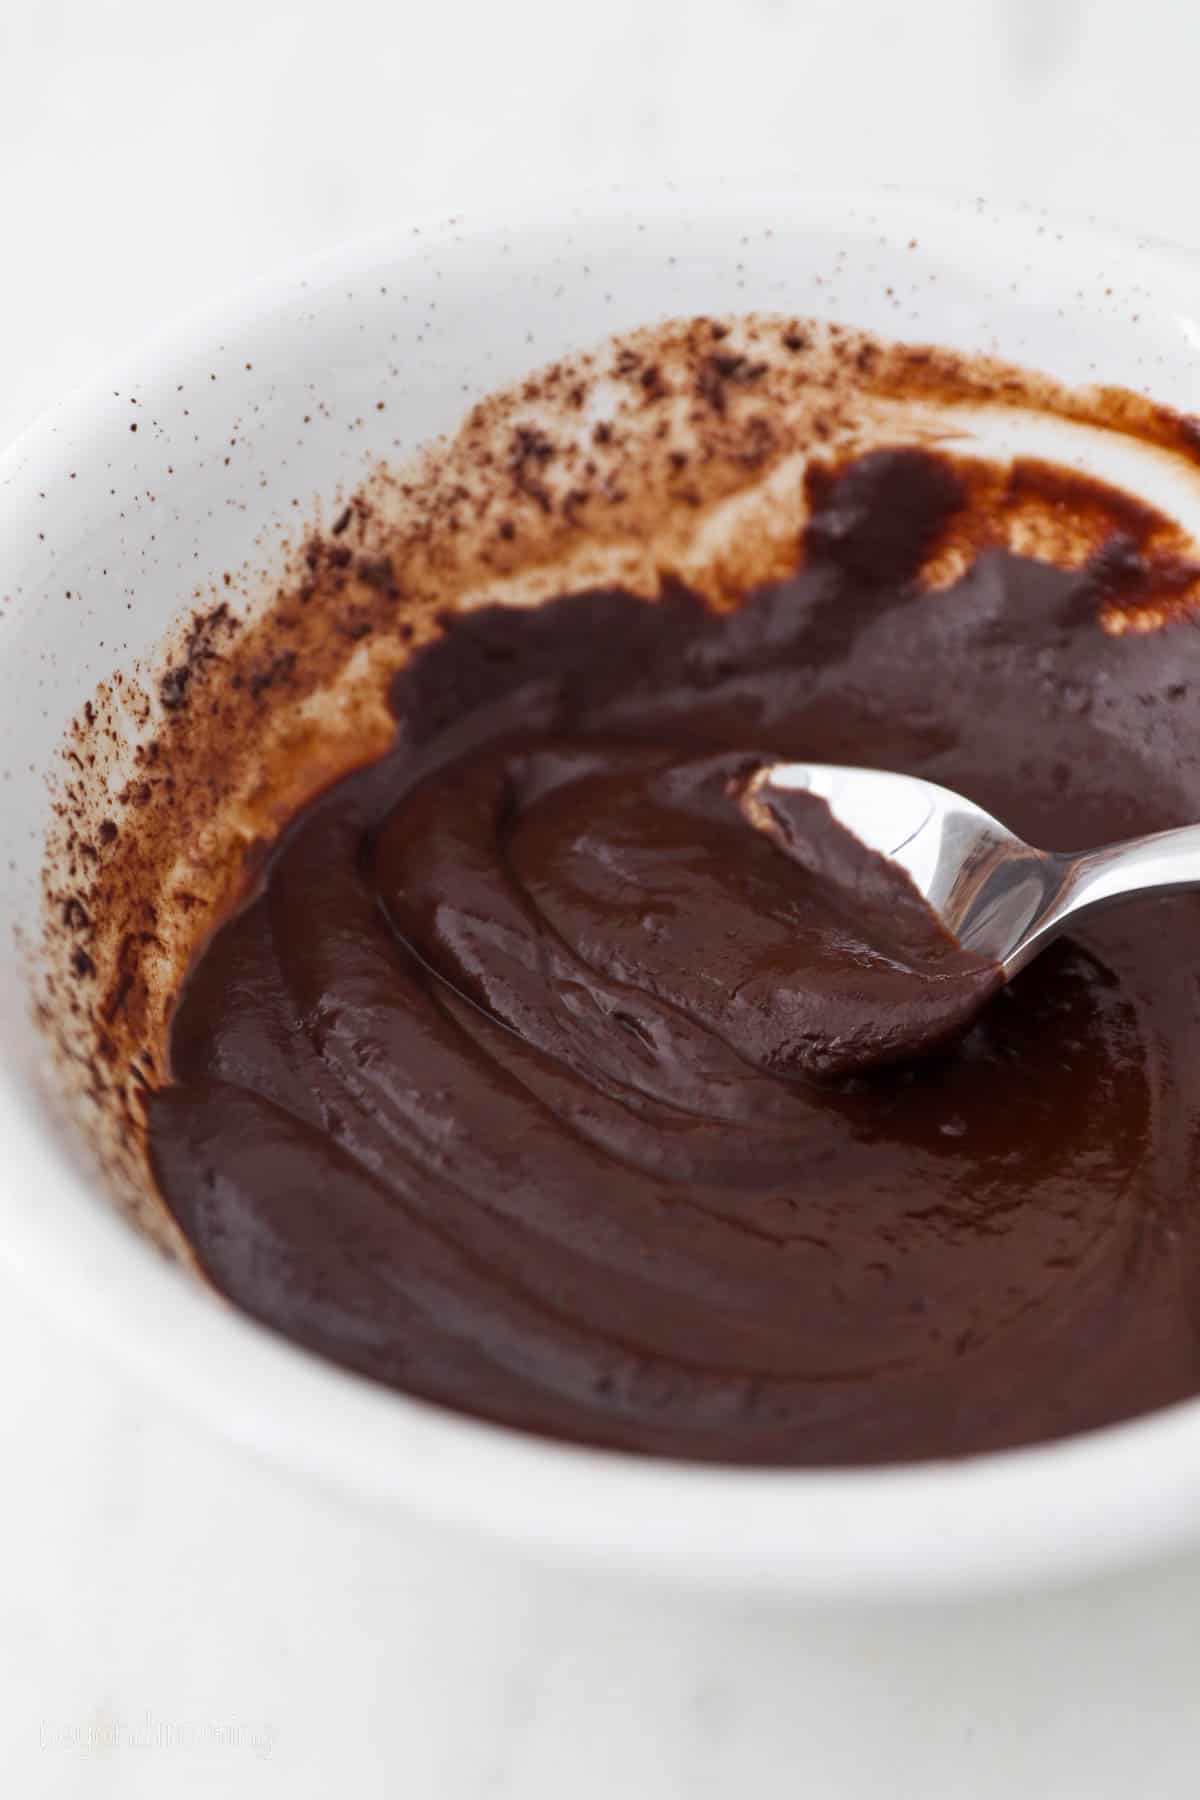 A spoon dipped into a bowl of melted chocolate.